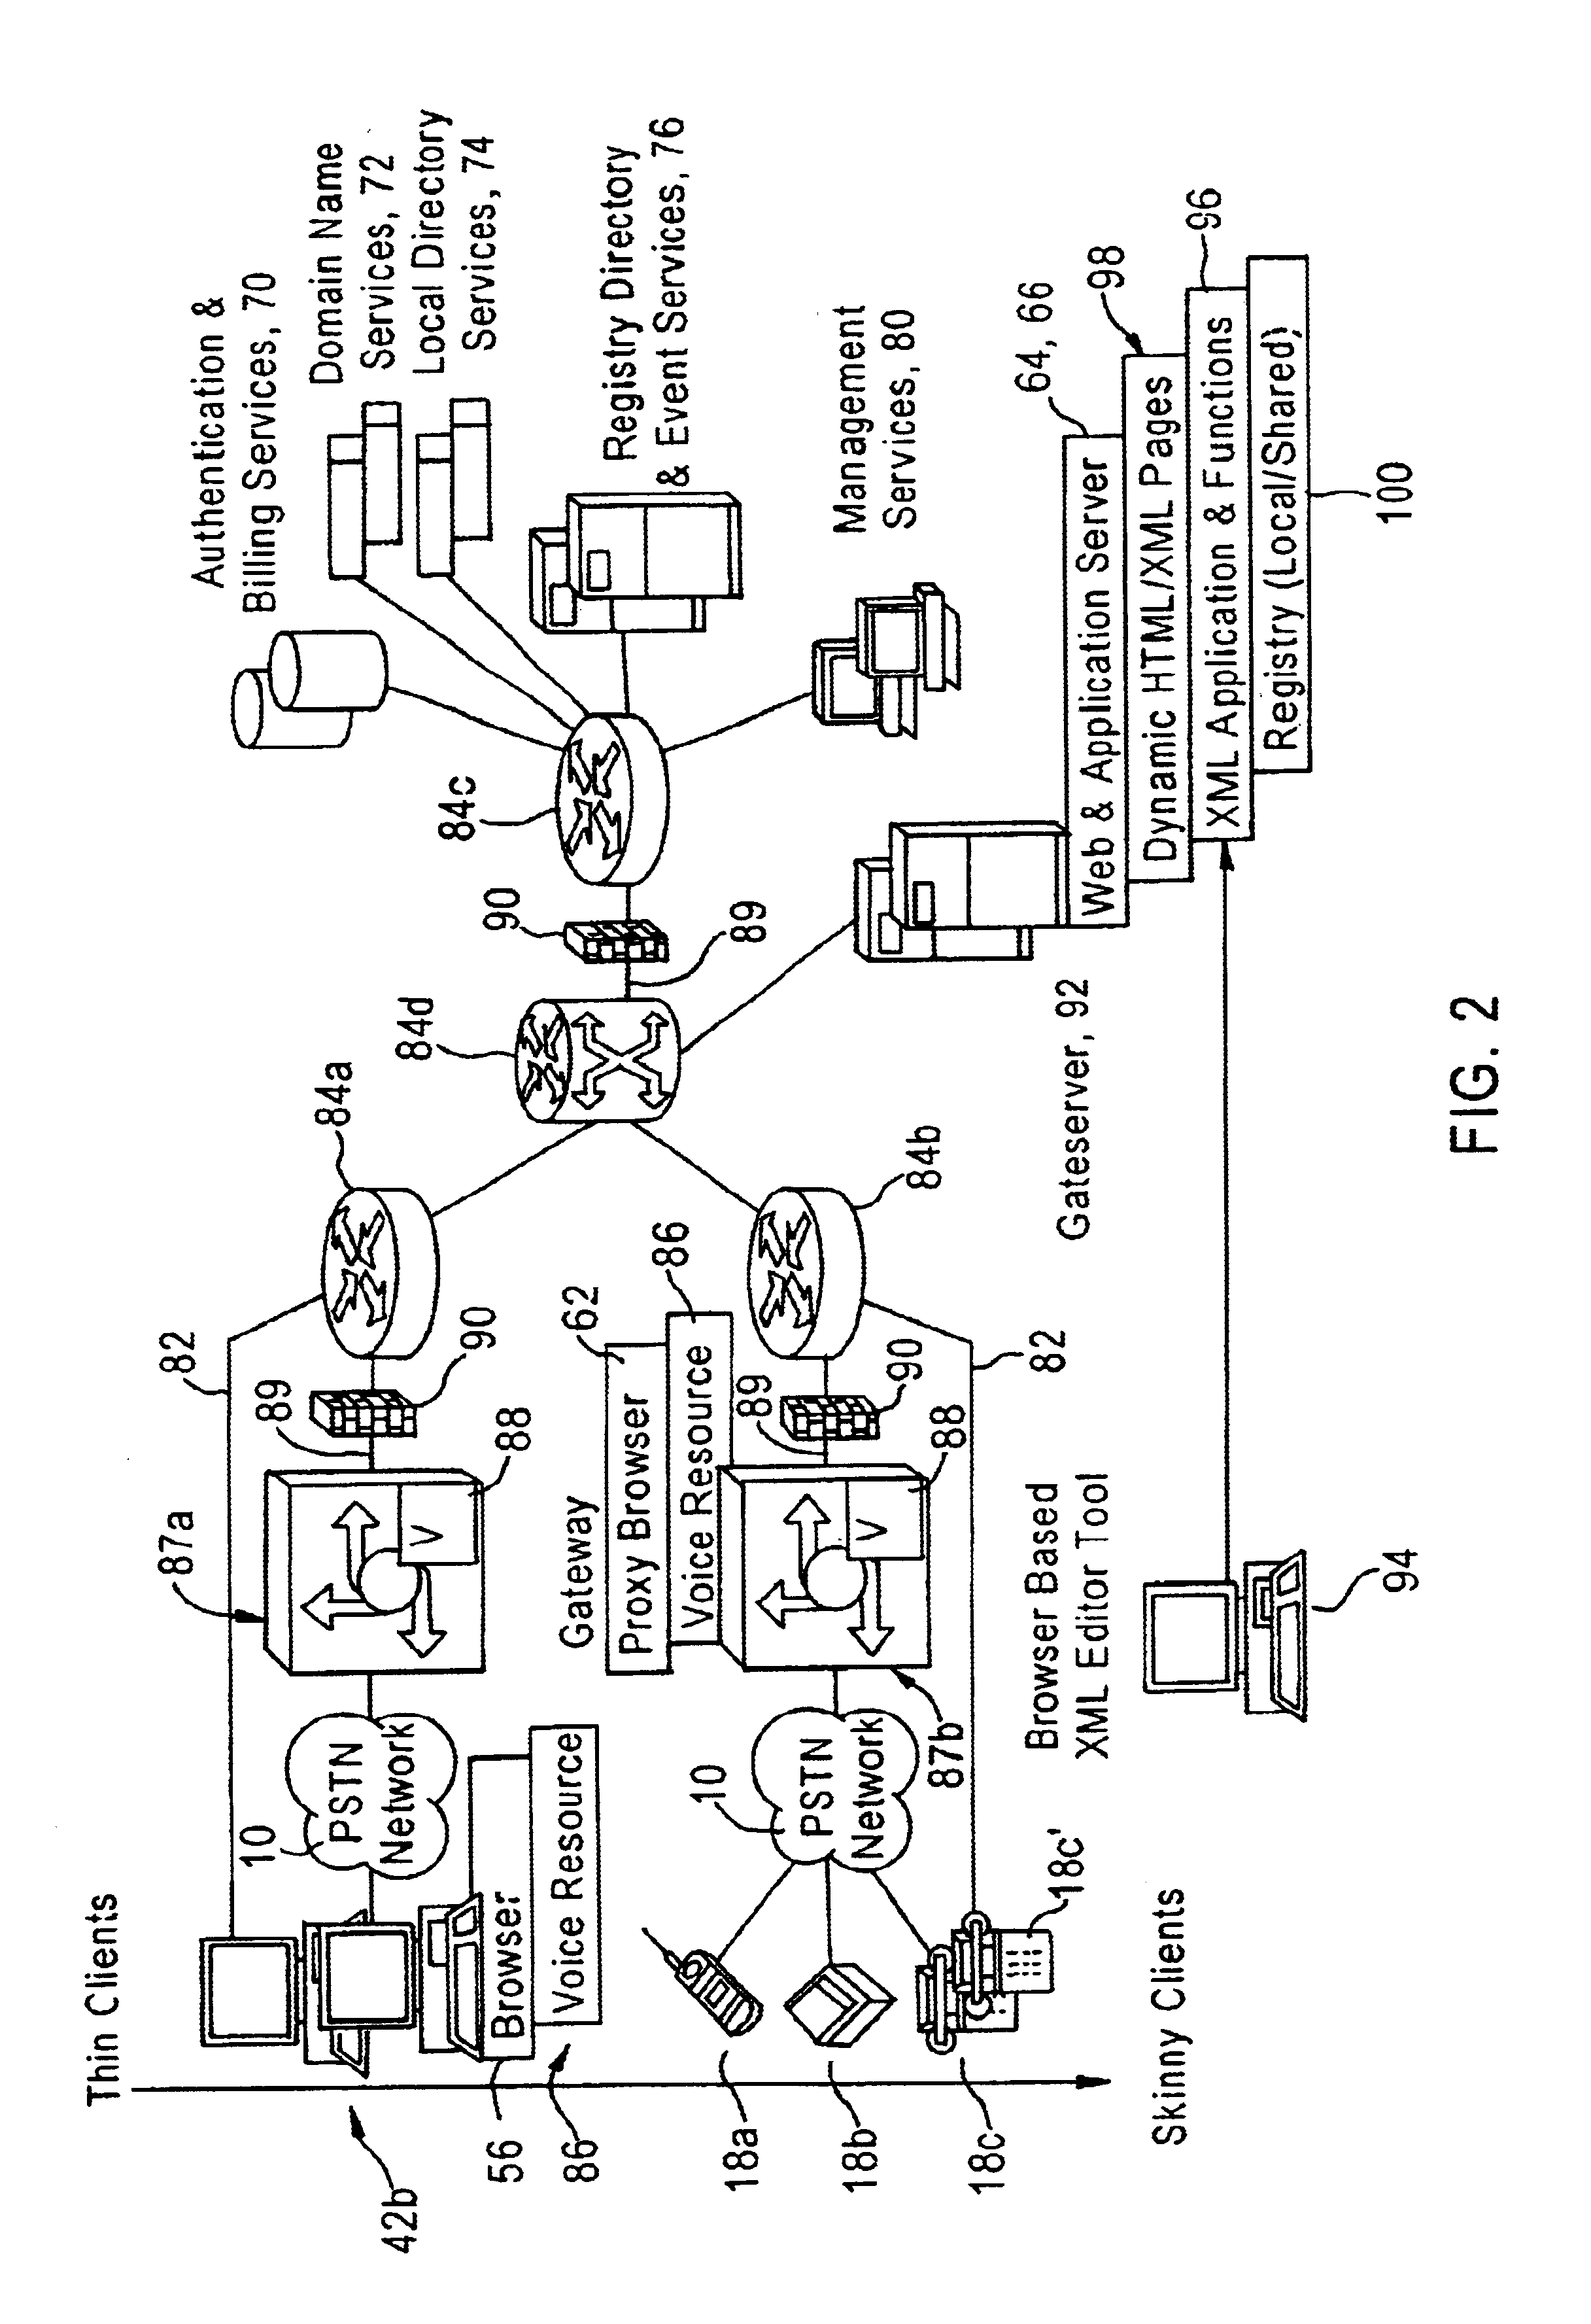 Apparatus and method for providing server state and attribute management for multiple-threaded voice enabled web applications